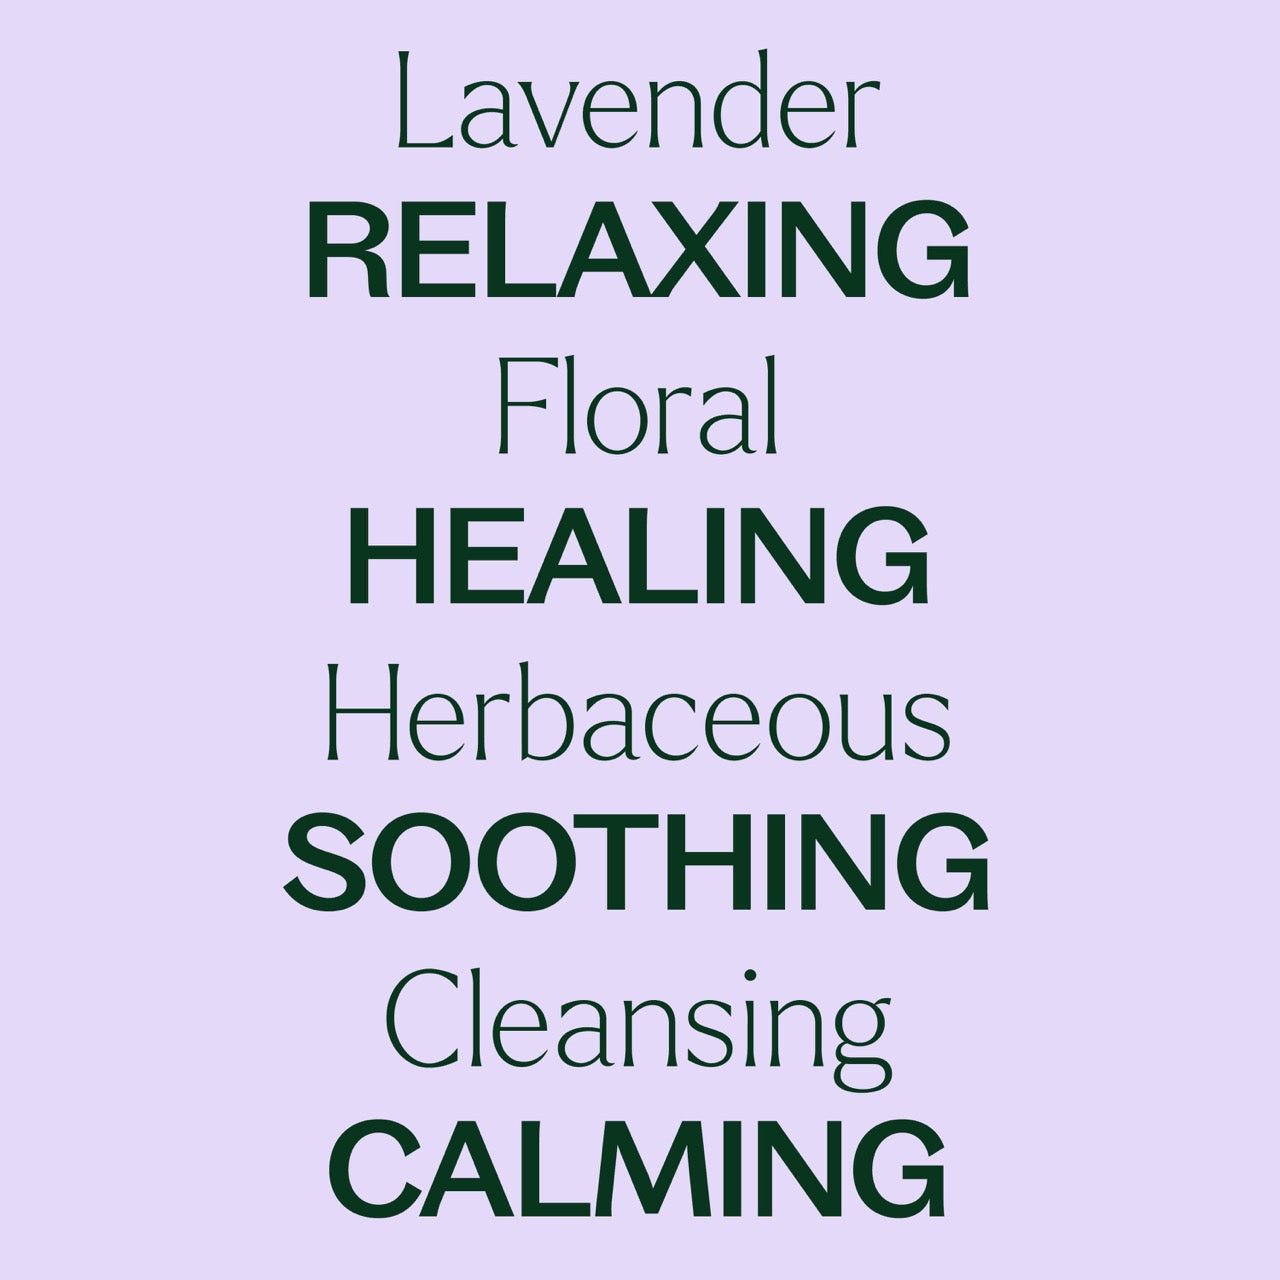 Key features Lavender Essential Oil: relaxing, floral, healing, herbaceous, soothing, cleansing, calming